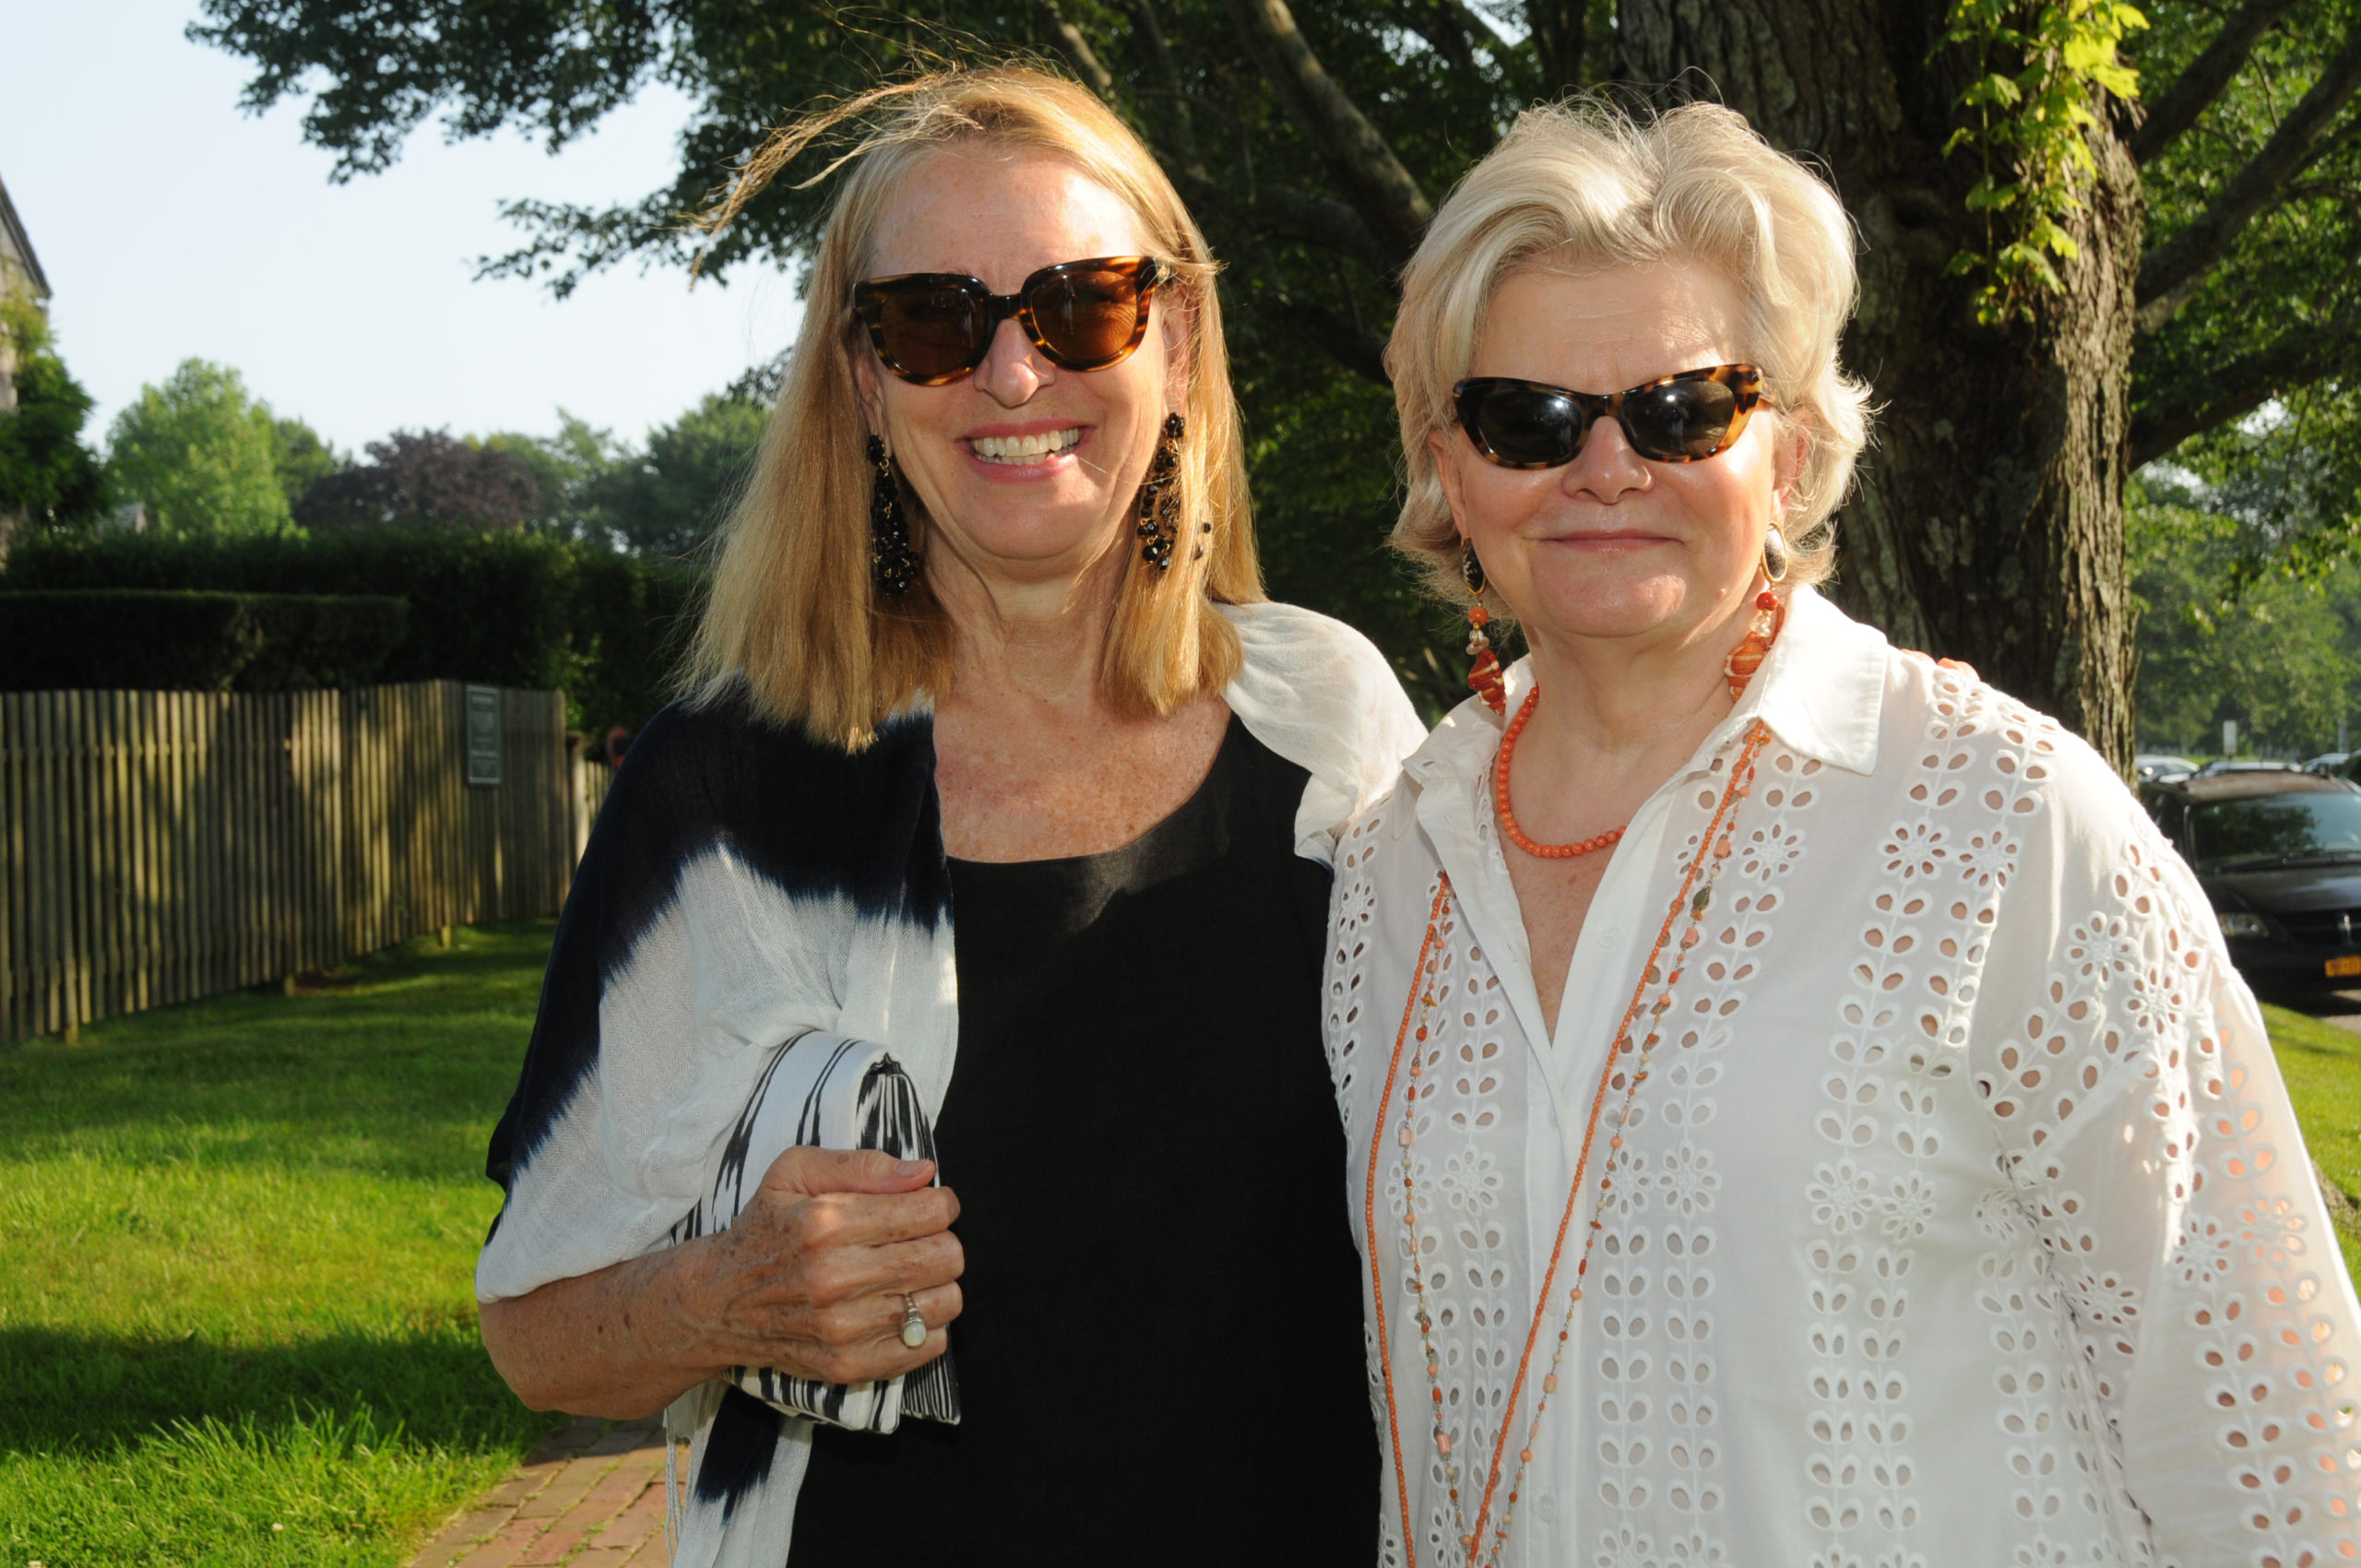 Anne Harris with interior designer Charlotte Moss at the  East Hampton Historical Society's preview benefit cocktail party for the 2021 East Hampton Antiques & Design Show on Friday evening on the grounds of Mulford Farm. RICHARD LEWIN